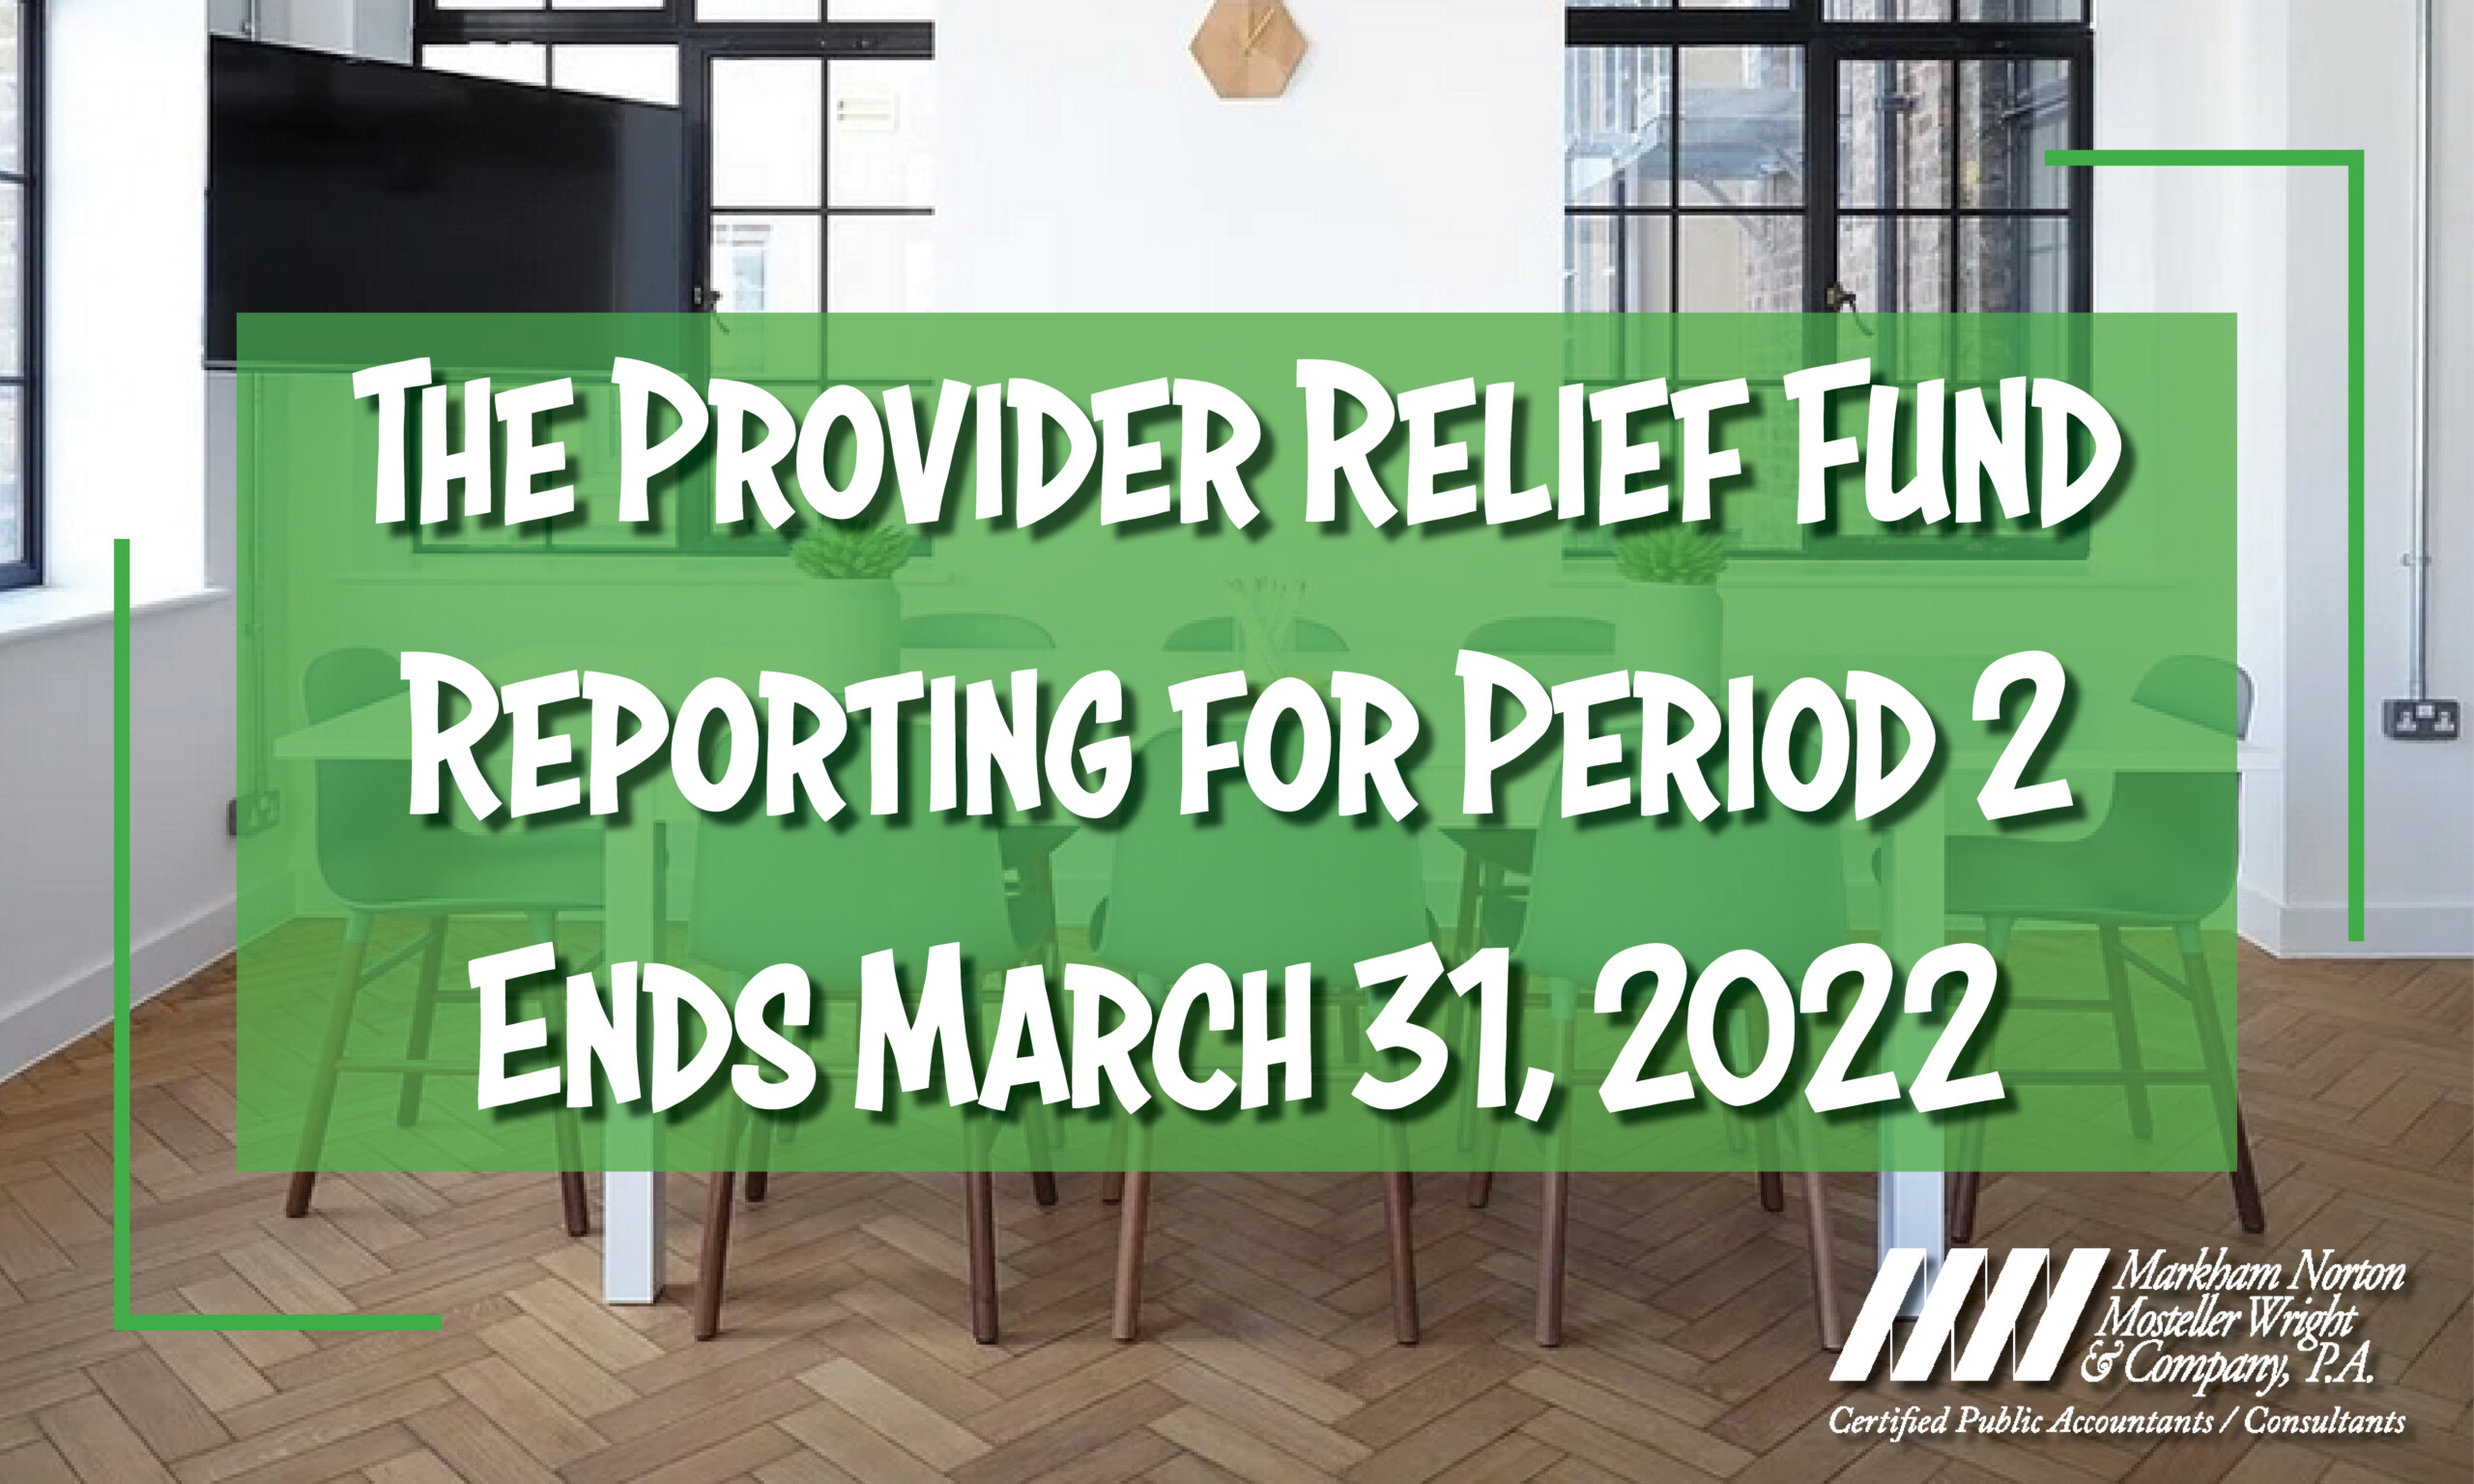 The Provider Relief Fund Reporting for Period 2 Ends March 31, 2022